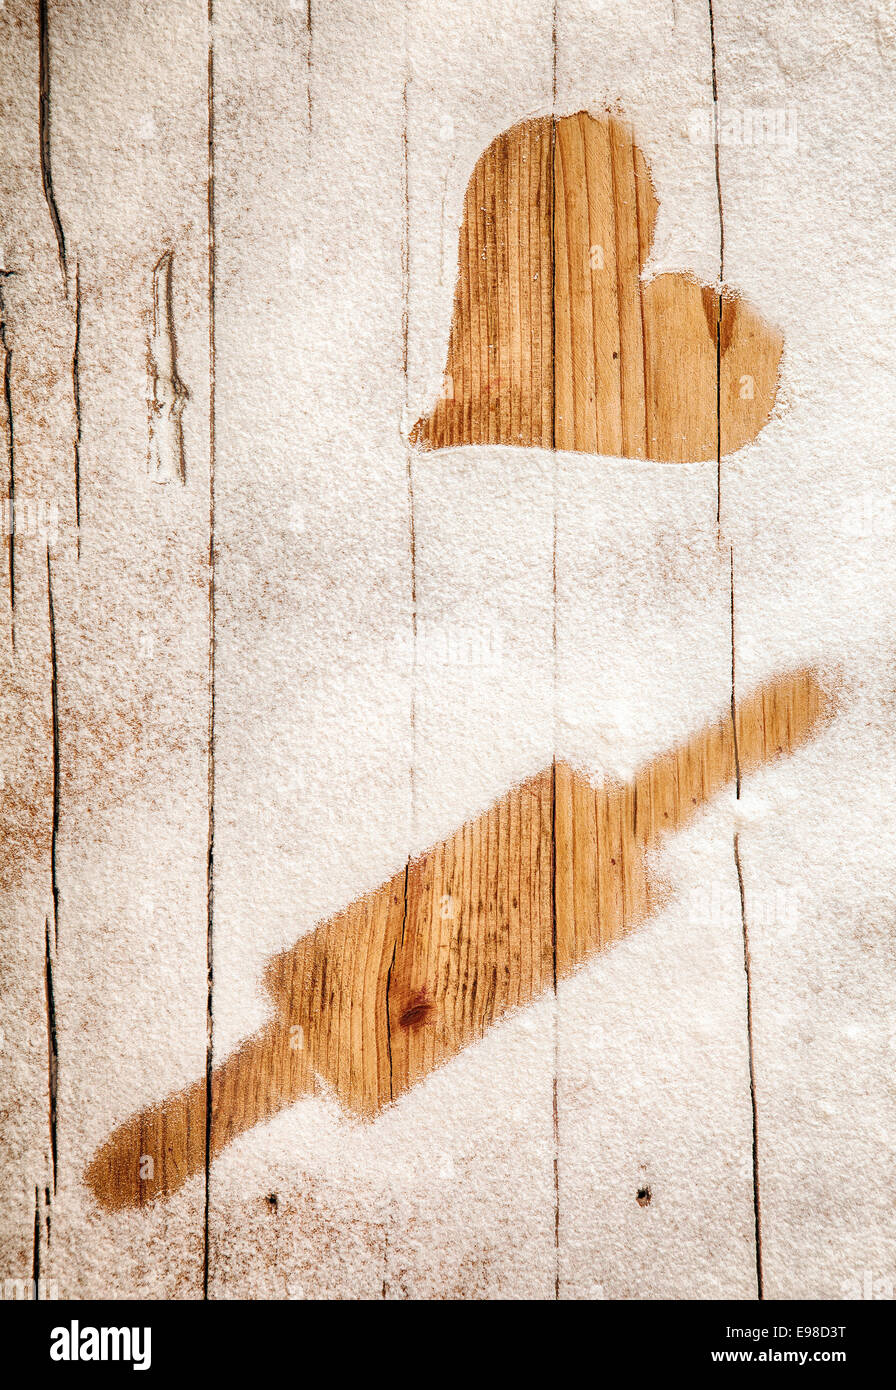 Imprint of a heart and rolling pin in flour on a wooden table top depicting a love of baking and cooking or as a romantic message on Valentines Day Stock Photo